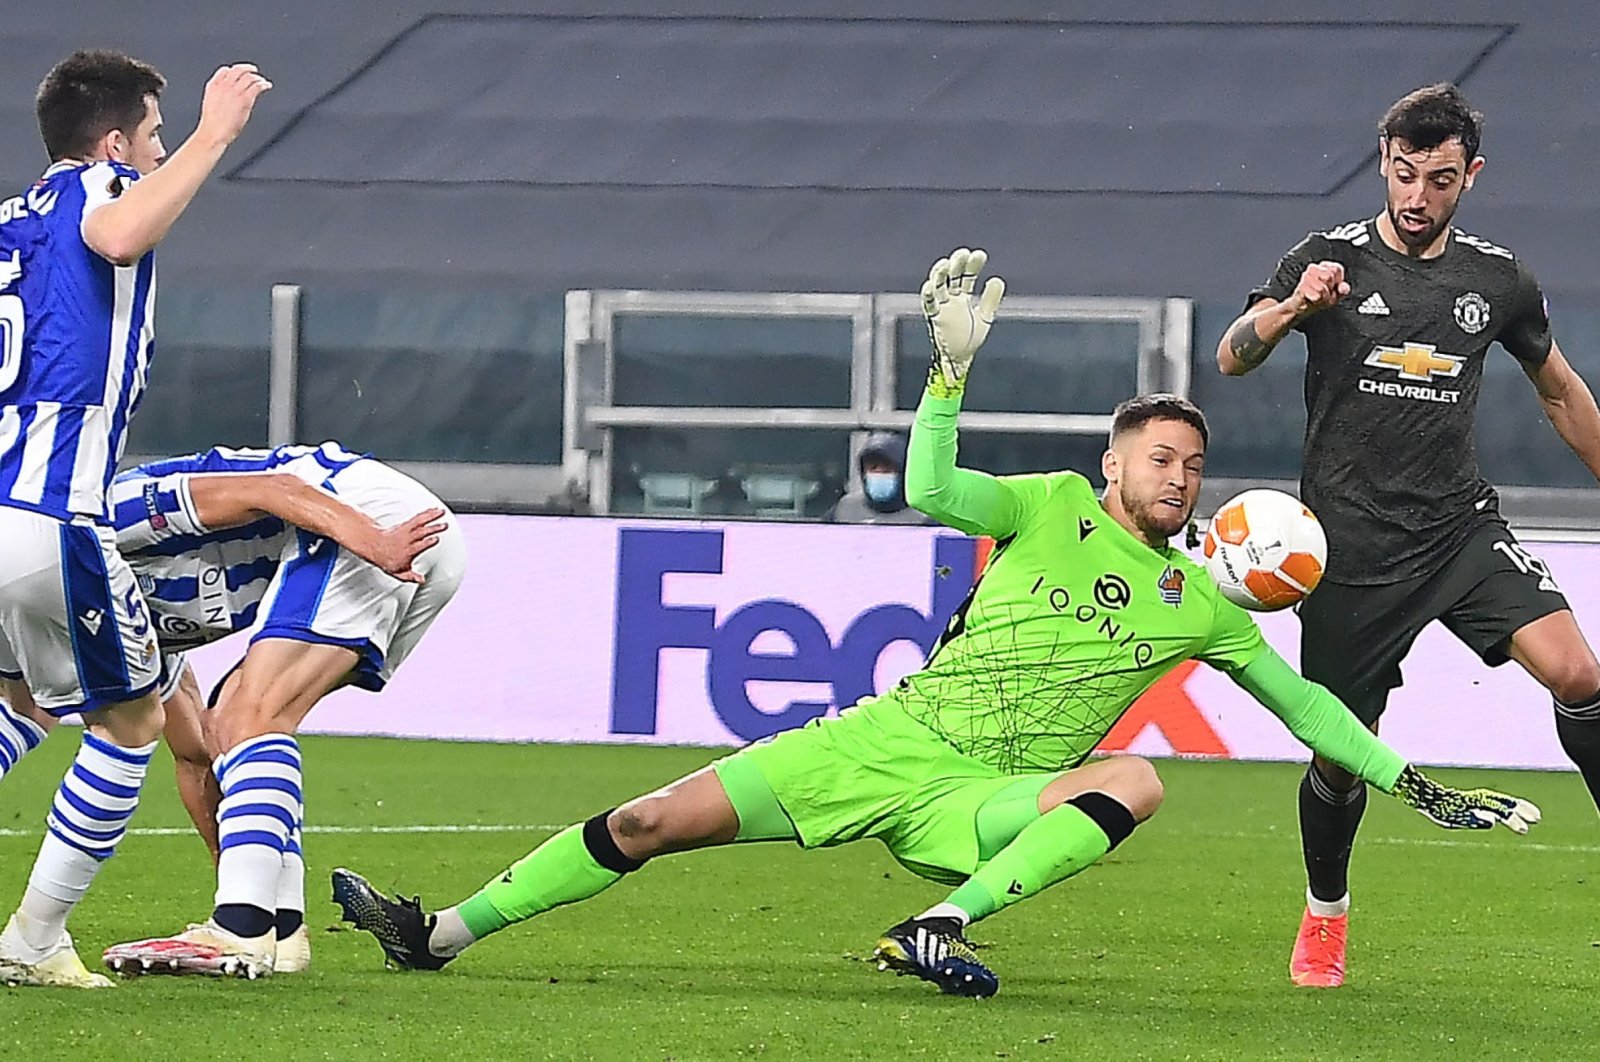 Manchester United’s Bruno Fernandes (R) on his way to scoring the opening goal against Real Sociedad in the UEFA Europa League round of 32 match at the Allianz Stadium, Turin, Italy, Feb. 18, 2021. (EPA Photo)